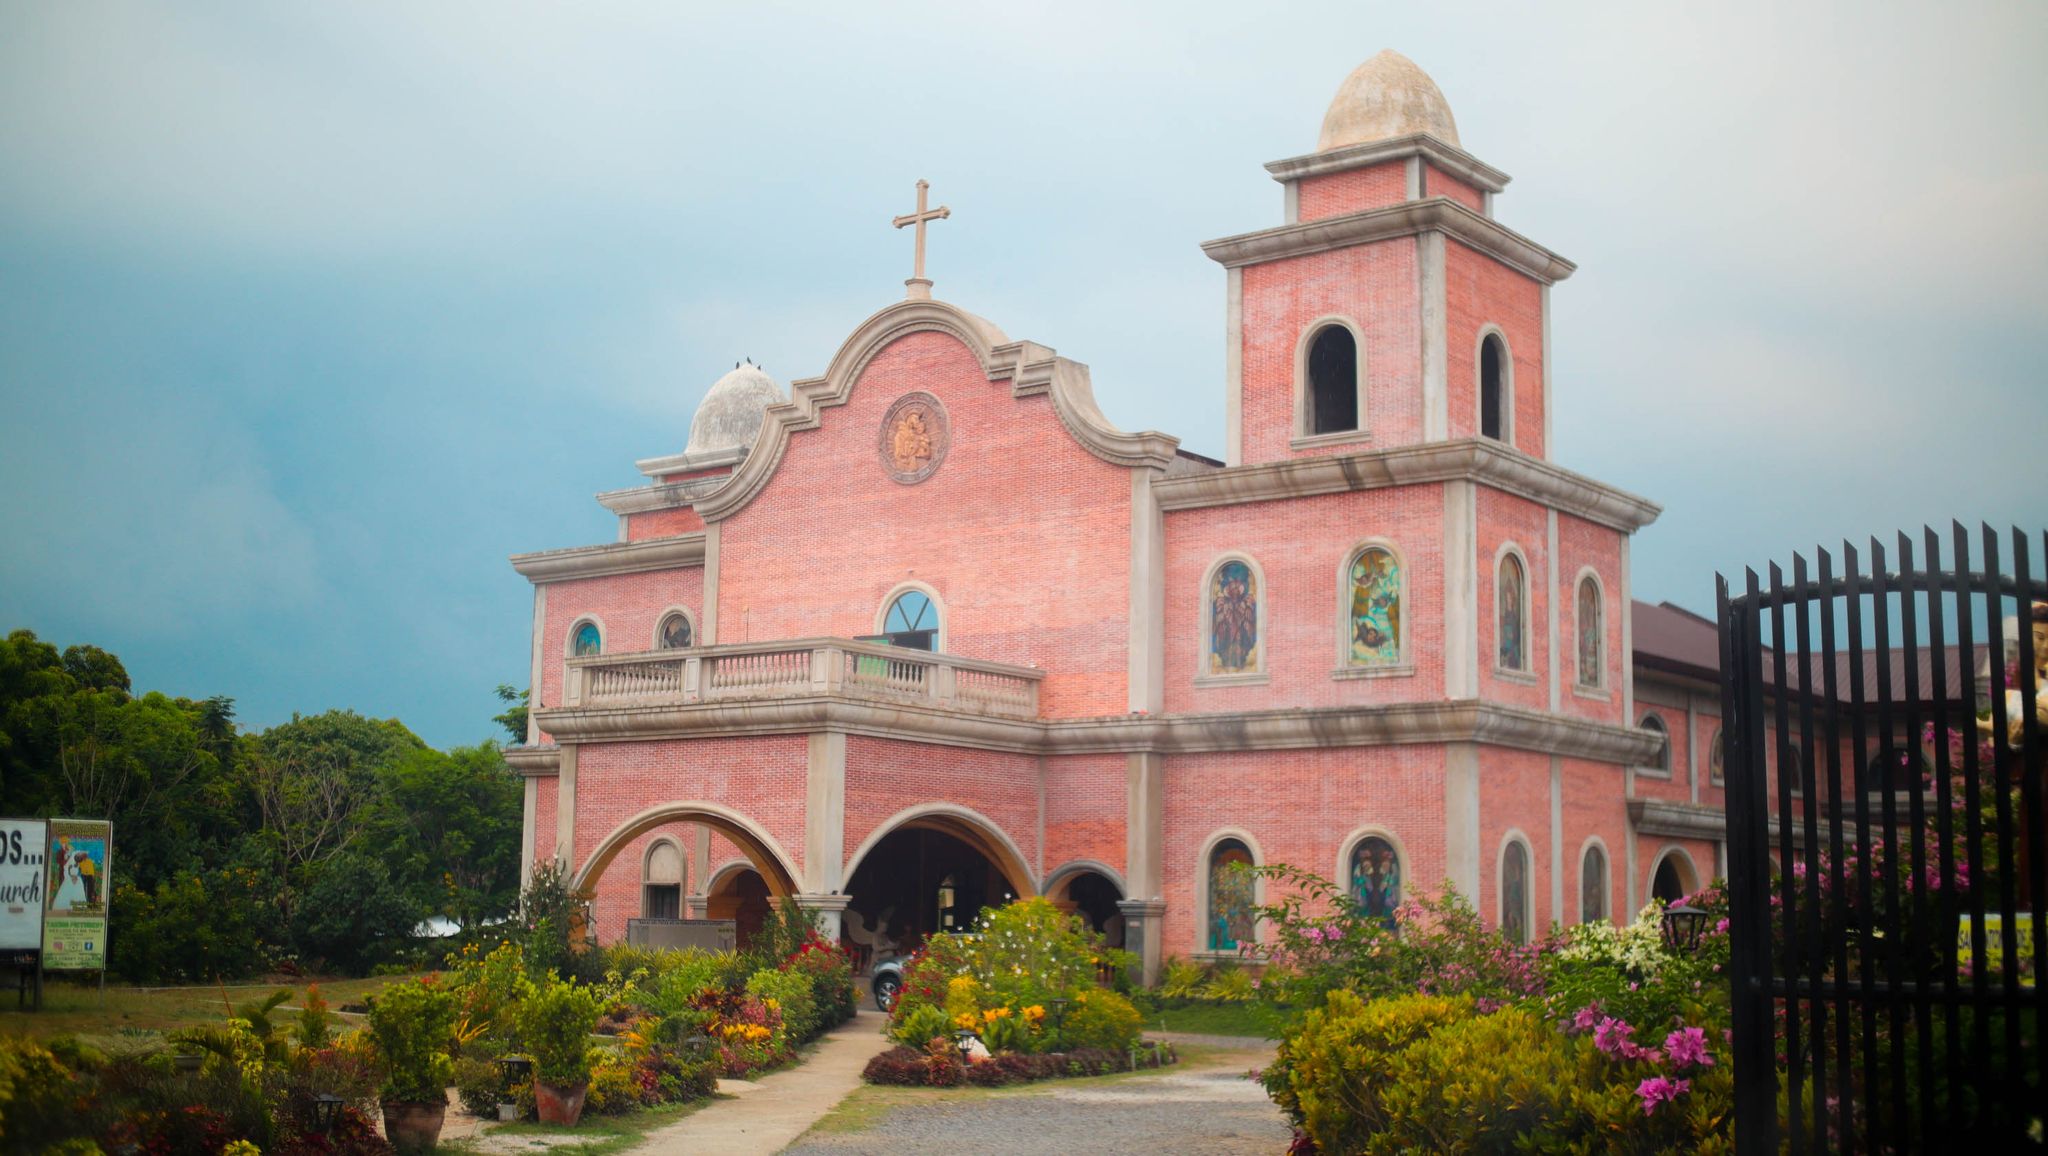 towns delight catering & events church guide in batulao batangas and tagaytay